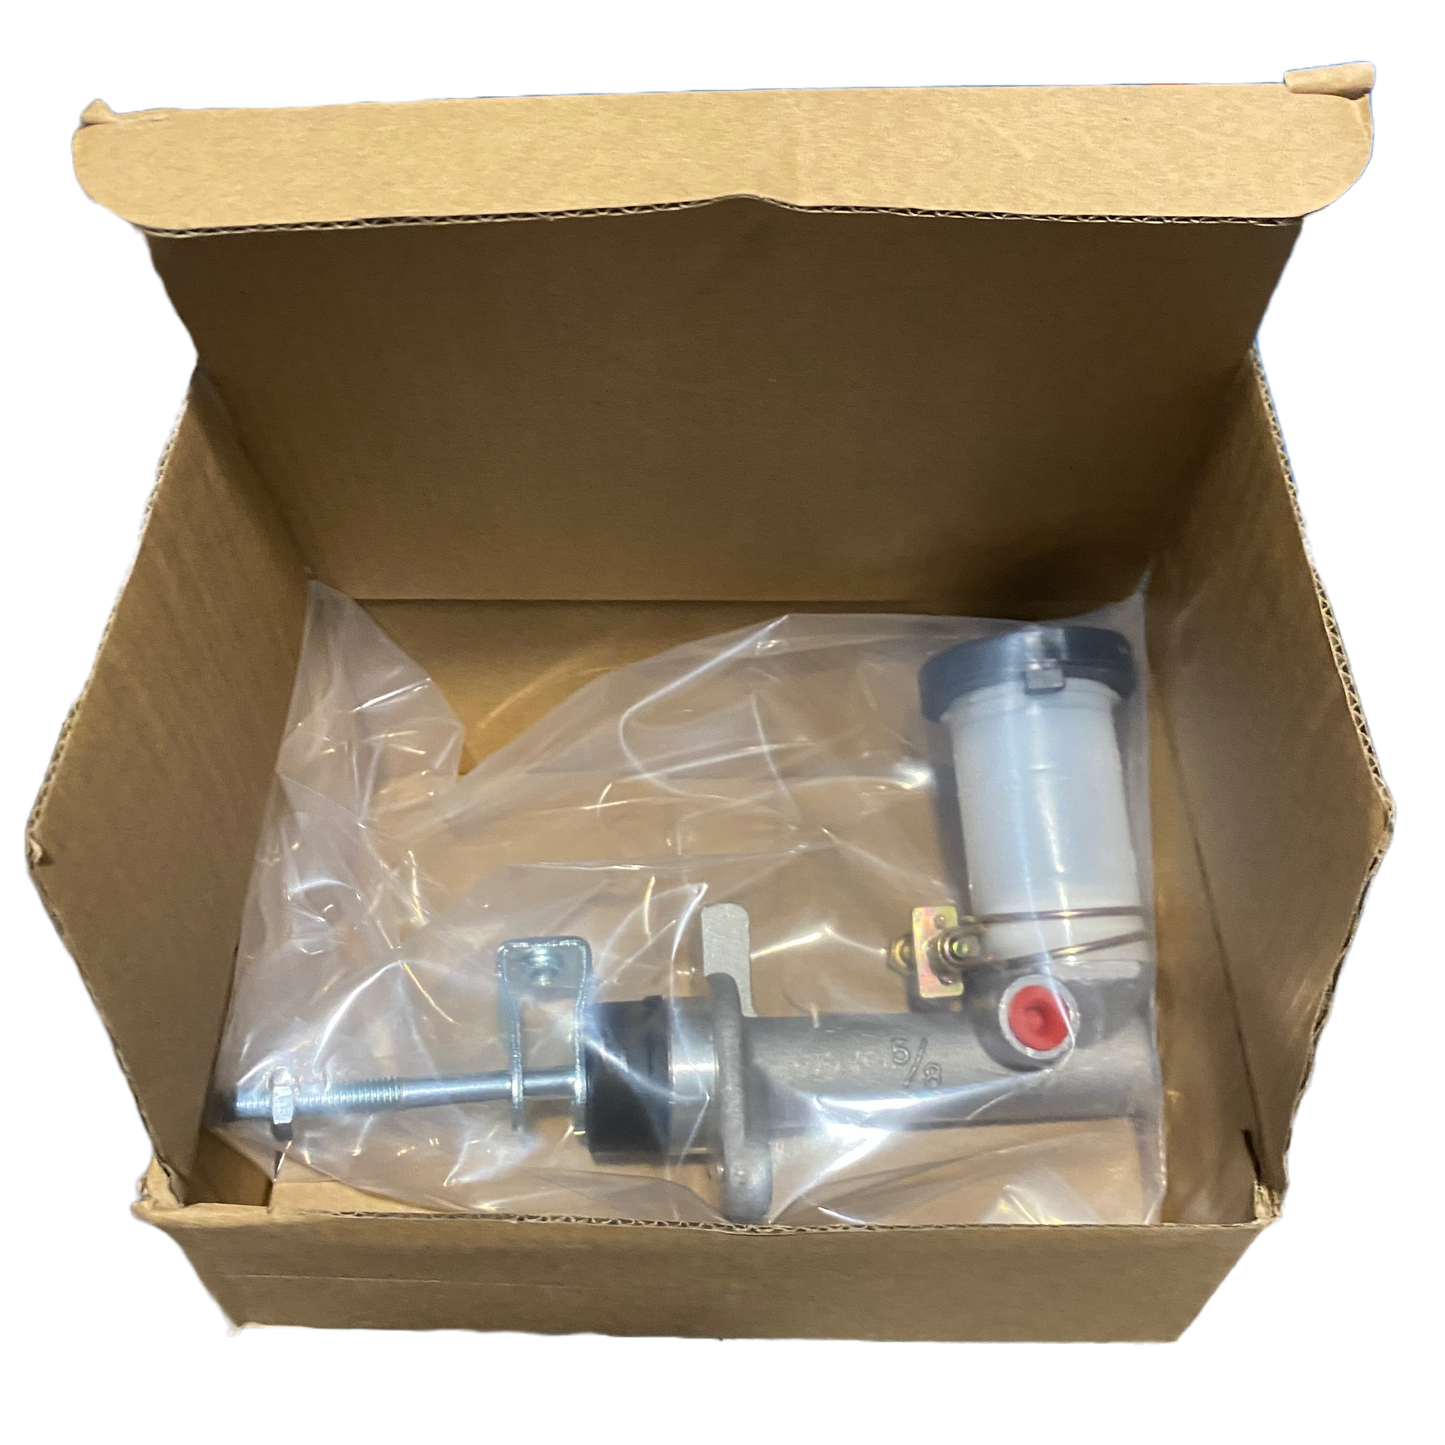 CLUTCH MASTER CYLINDER - 41610 22950 - Hyundai EXCEL X3 (1995-2000) - NEW - by Zenith Reproduction Parts